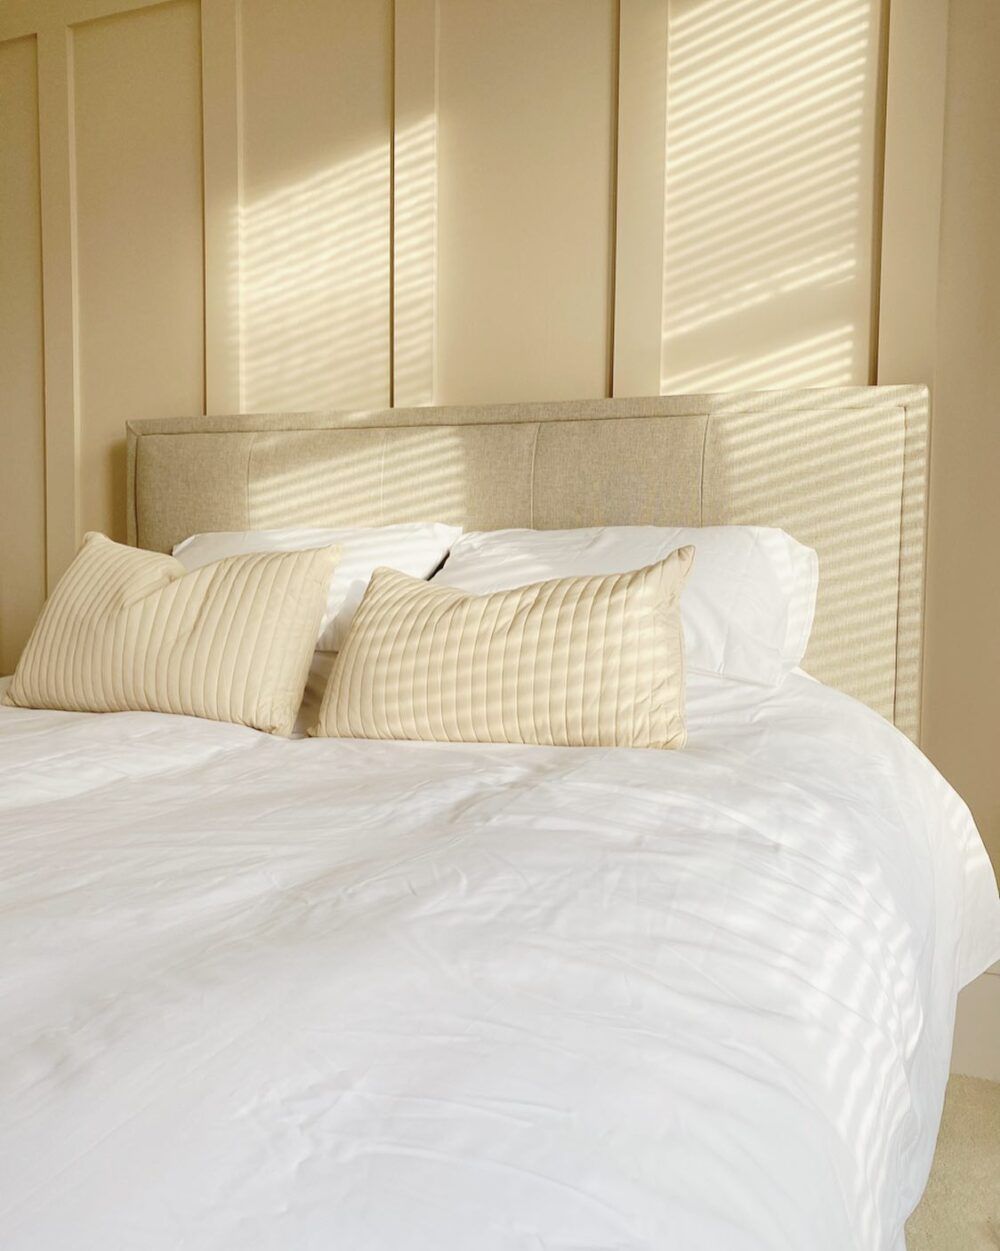 A bed with white bedding, two yellow pillows, and a light beige headboard. Set against a soft yellow wall with panelling.